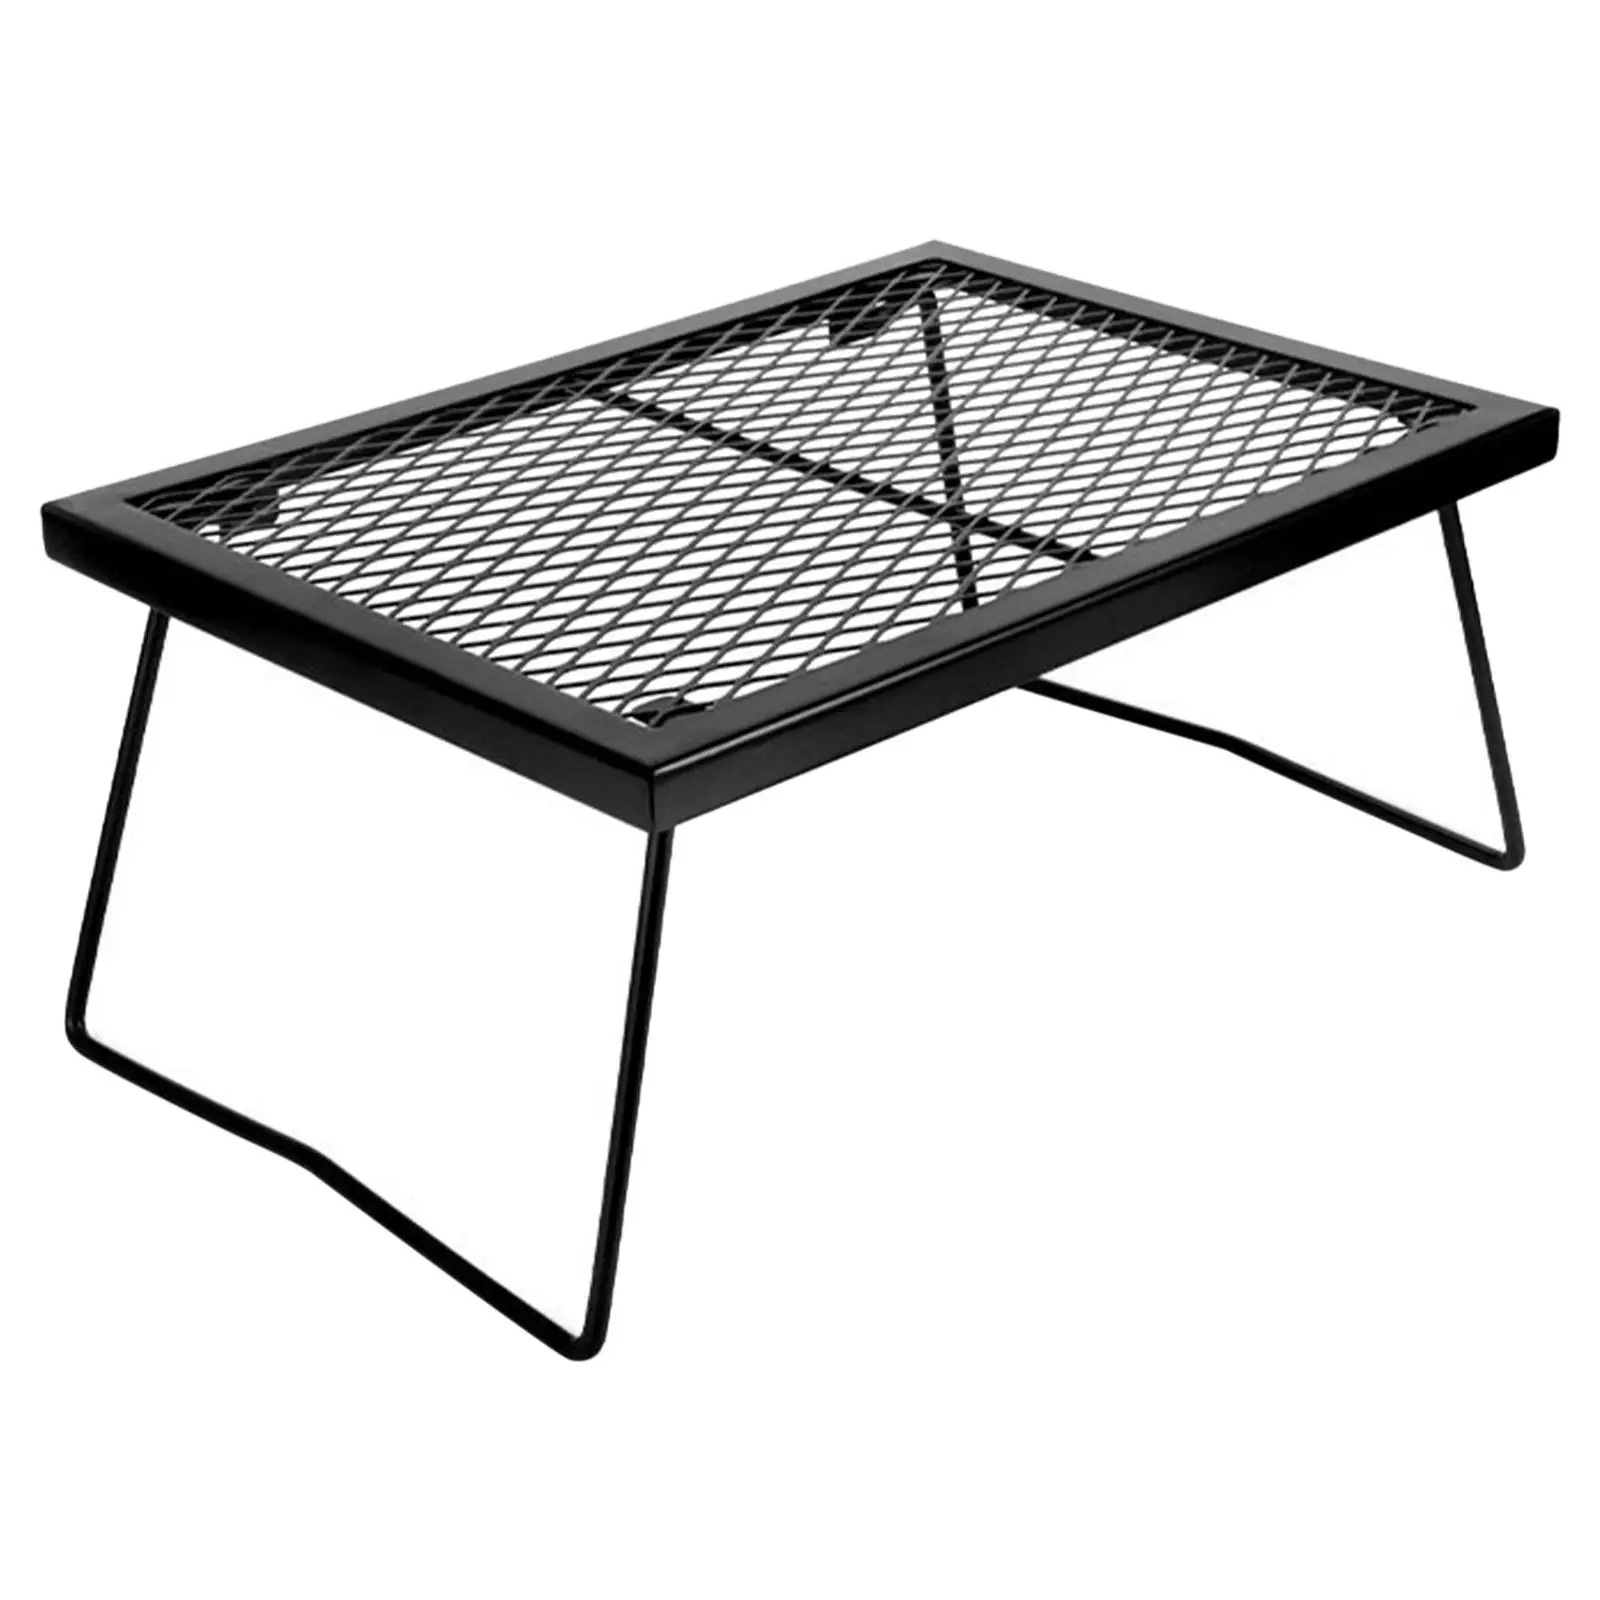 Outdoor Folding Mesh Table Barbecue Net Table for Patio Outdoor Hiking